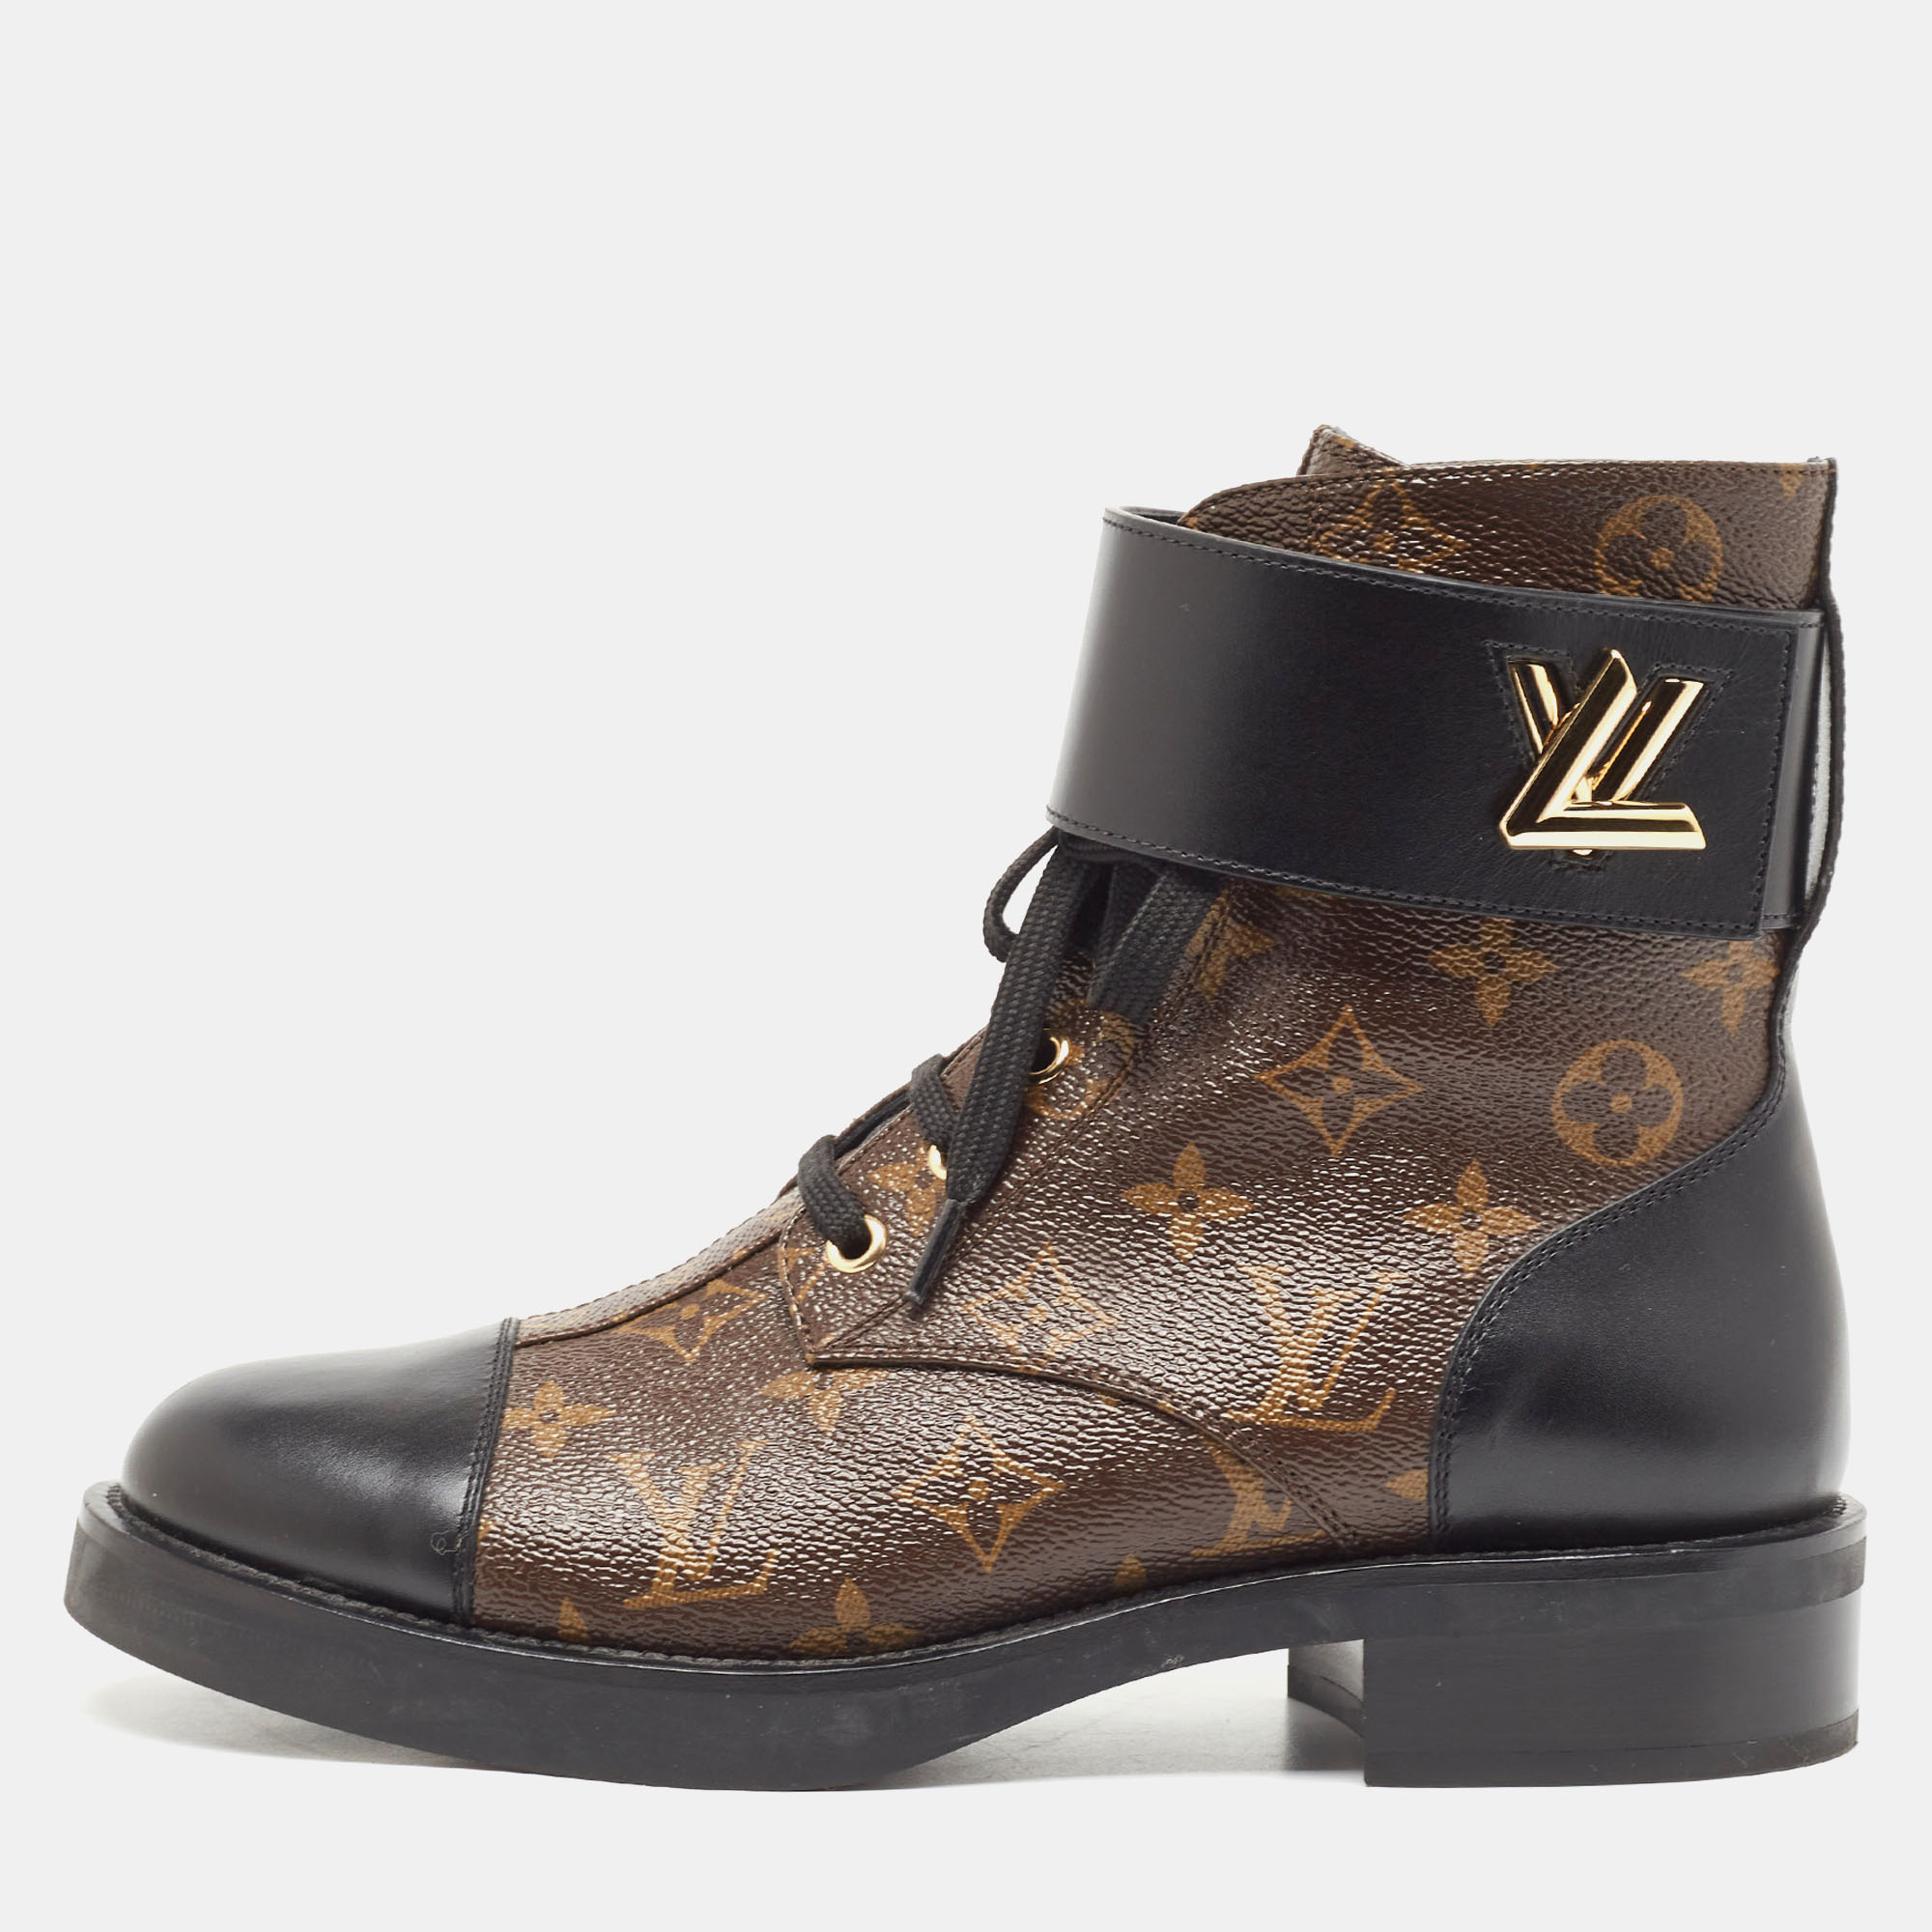 Pre-owned Louis Vuitton Brown/black Monogram Canvas And Leather Wonderland Flat Ranger Boots Size 39